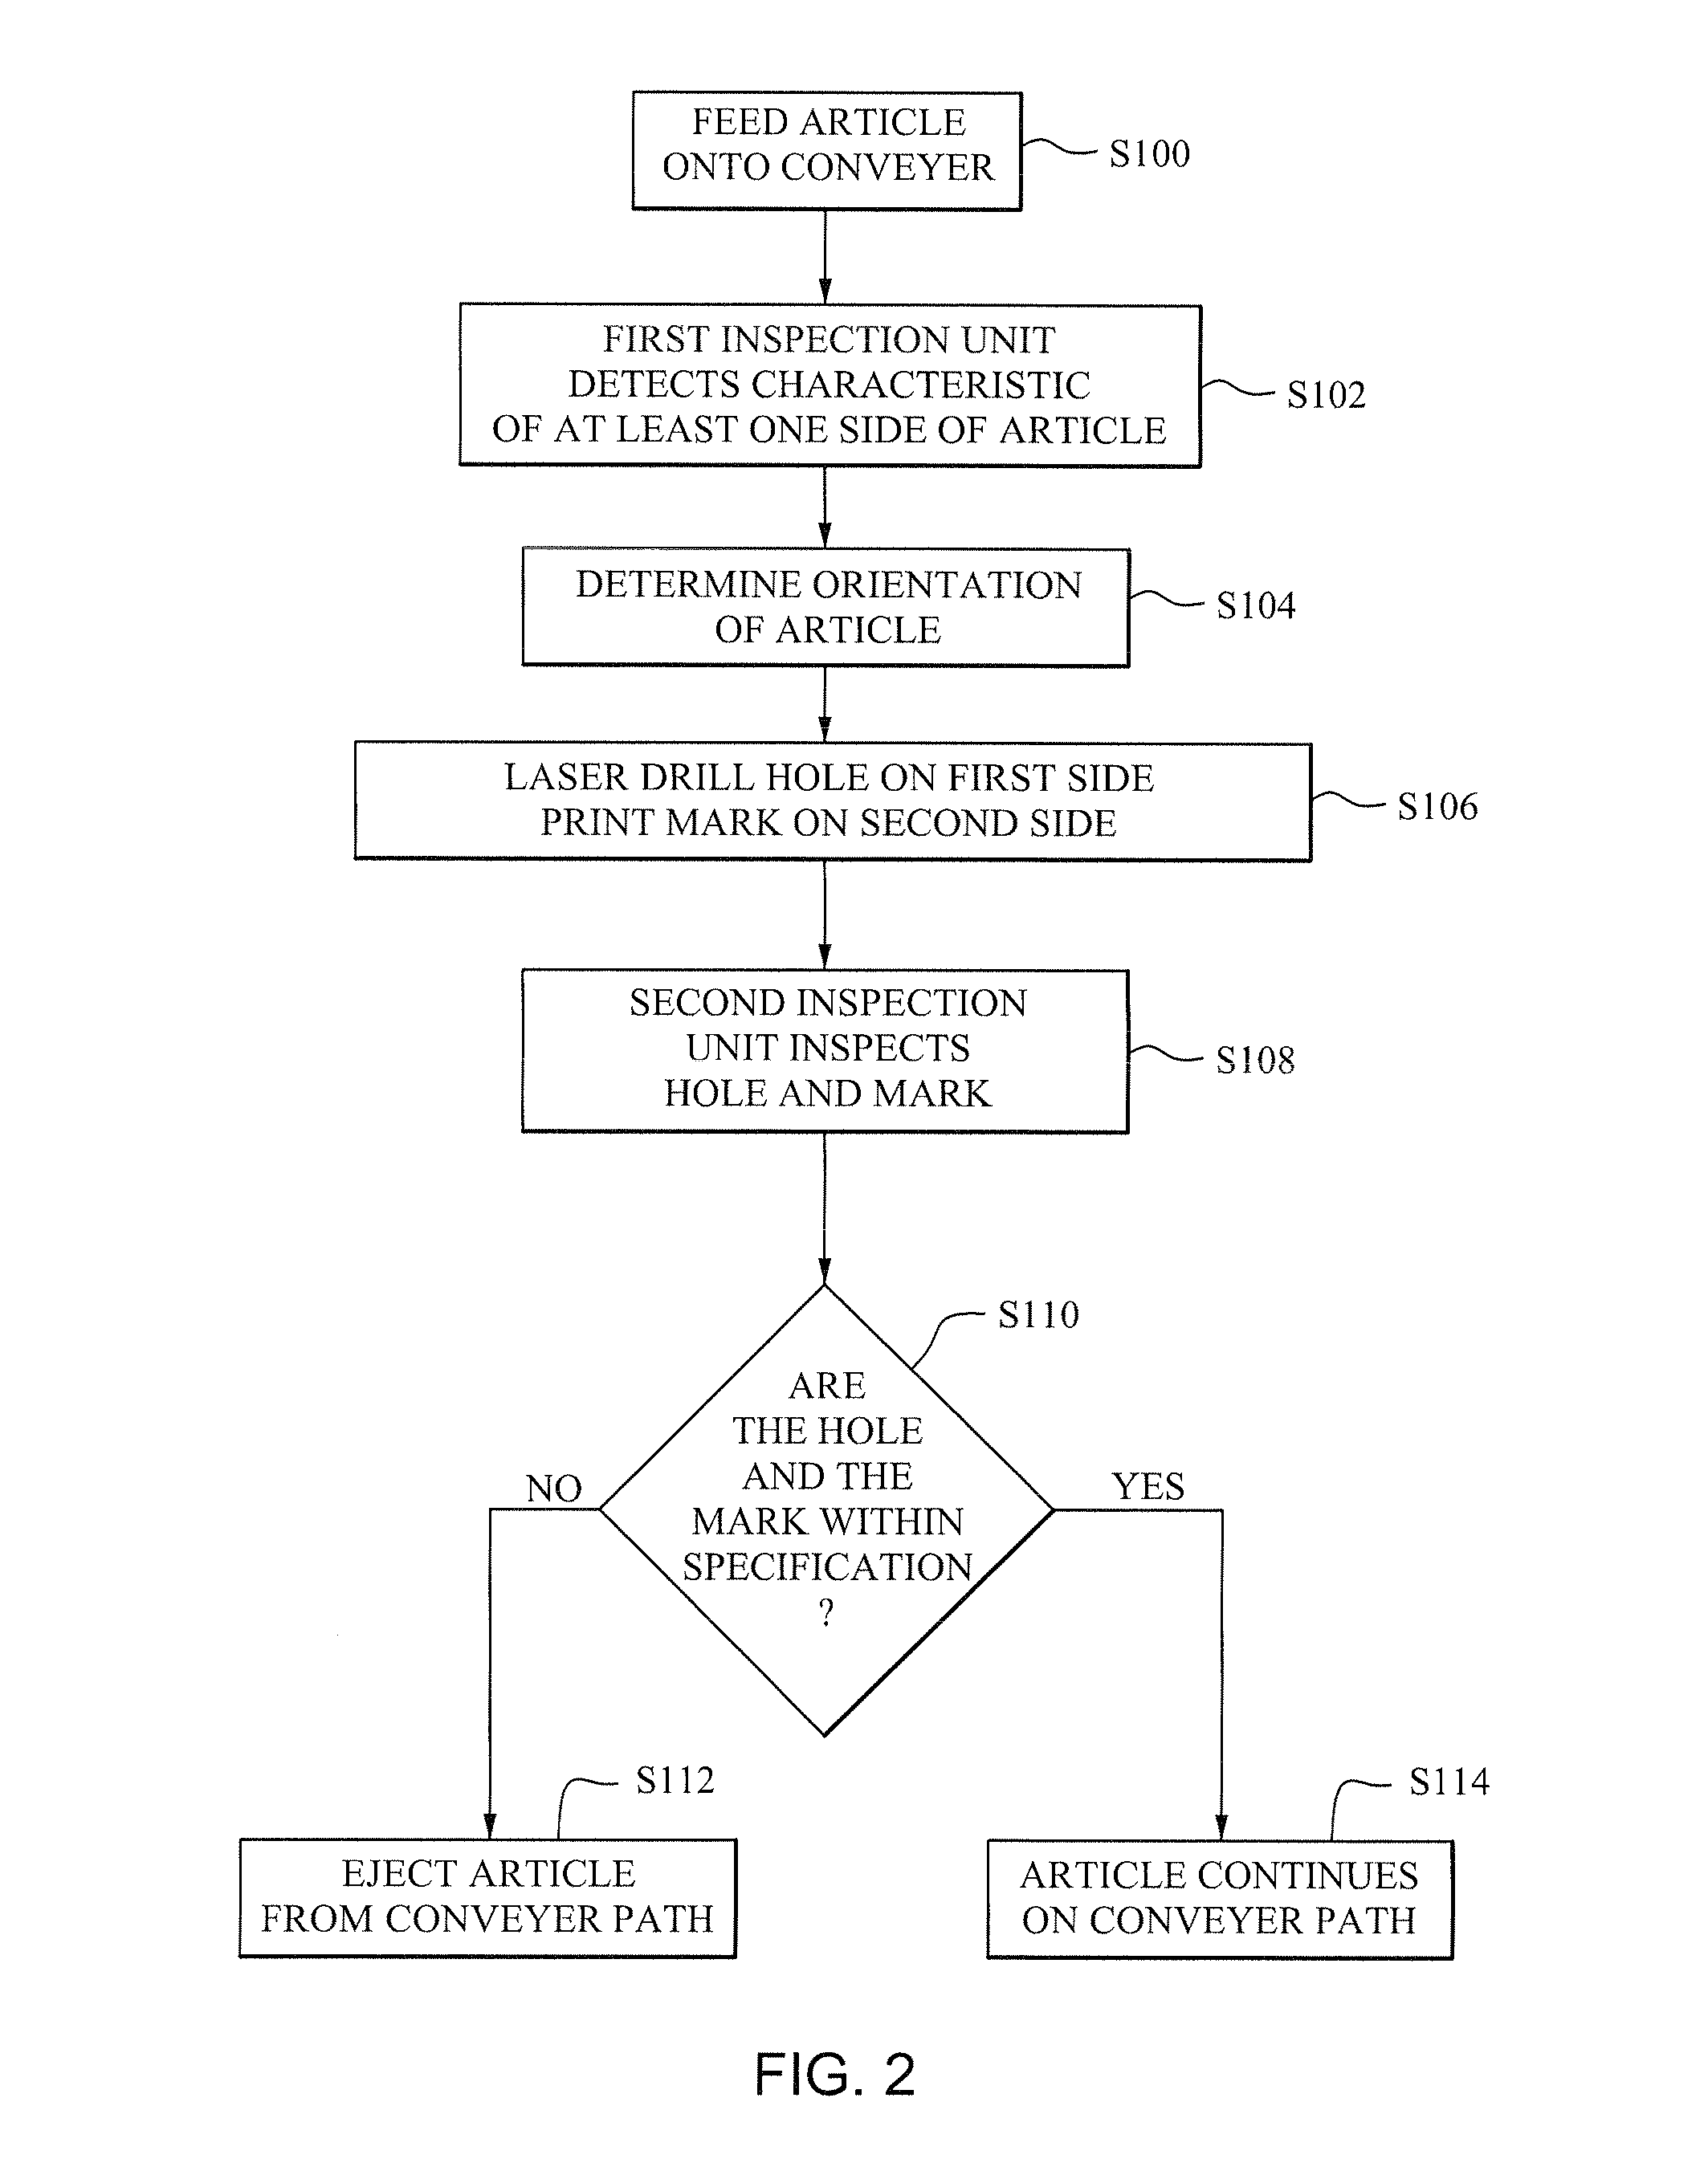 Apparatus and method for inspecting and processing pellet-shaped articles